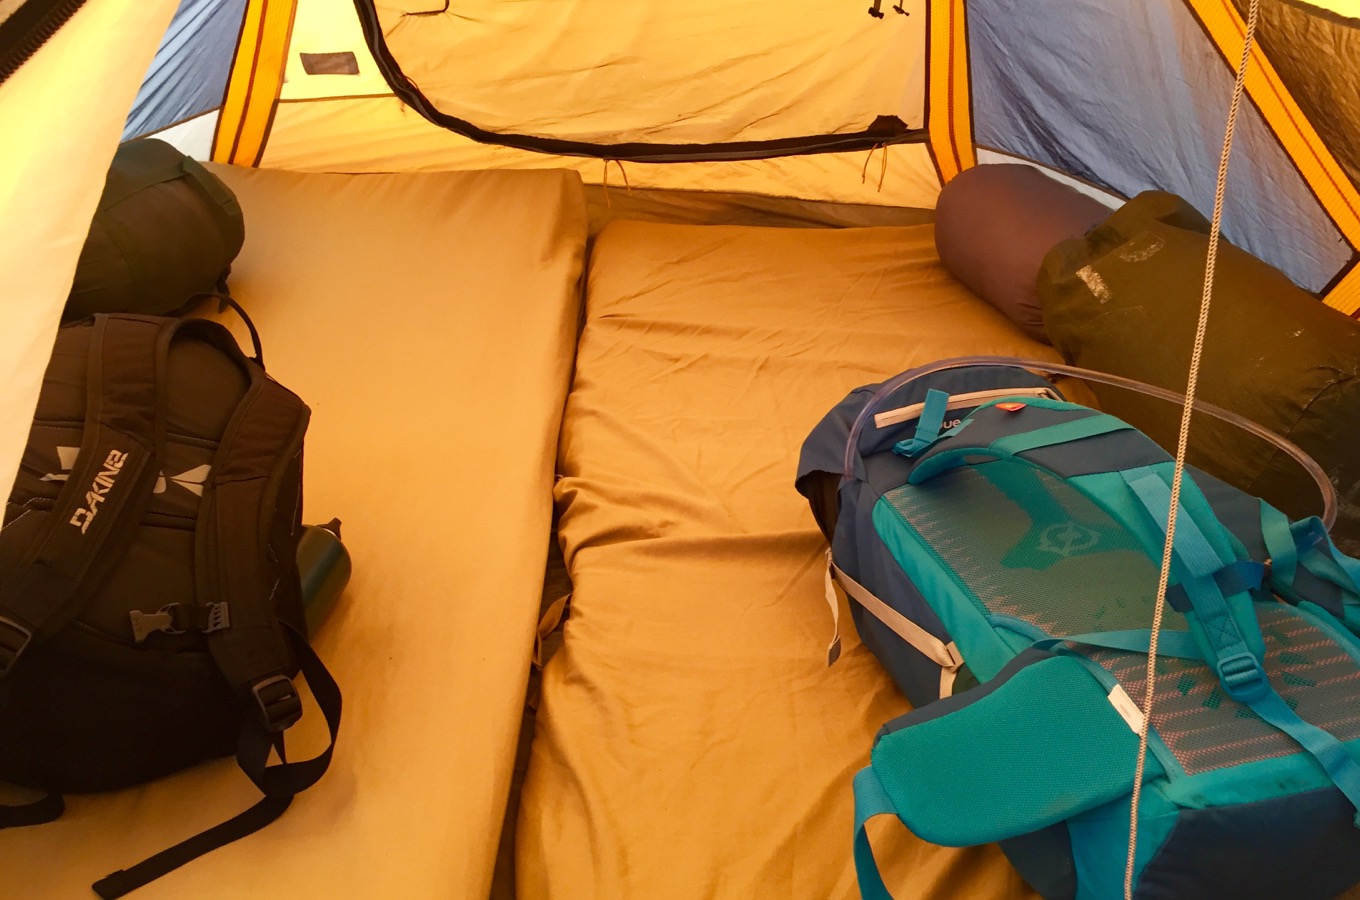 Tent with matrasses and backpacks